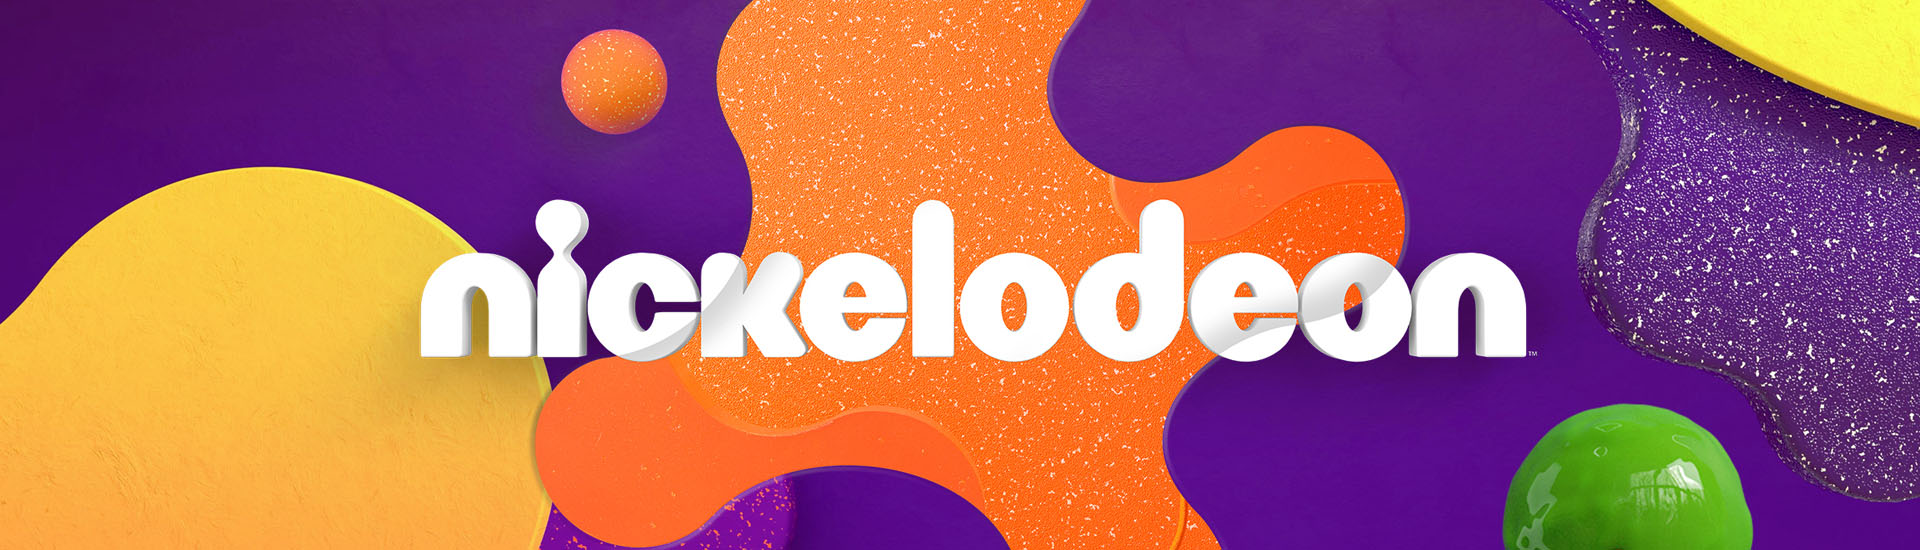 Image for Nickelodeon